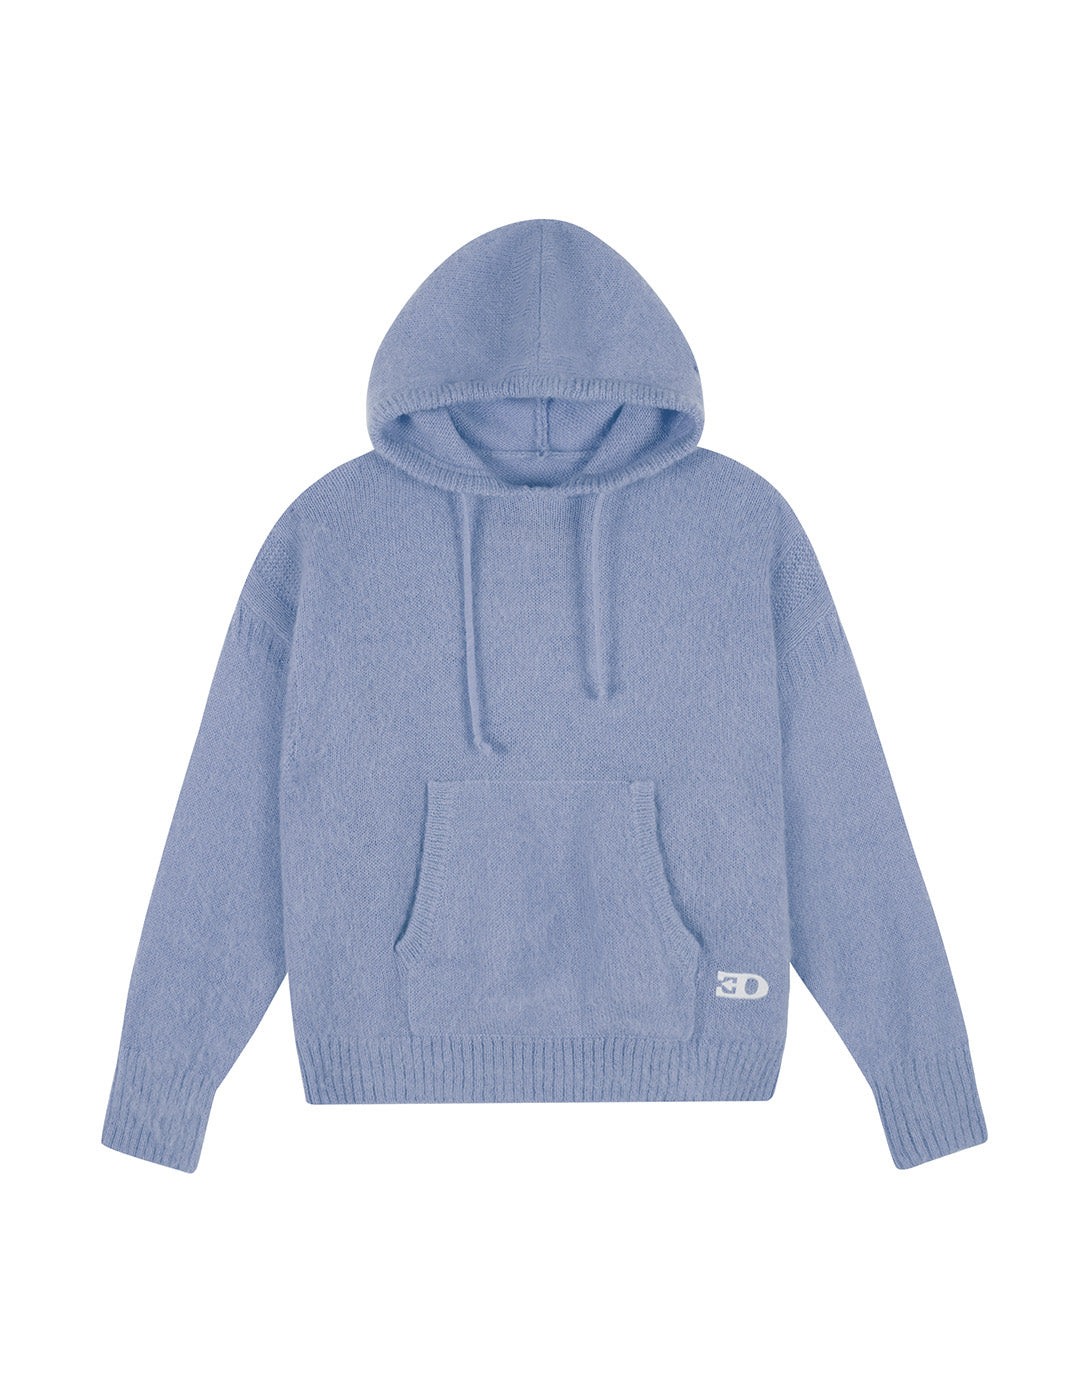 THE GUERNSEY HOODIE IN LIGHT BLUE MOHAIR